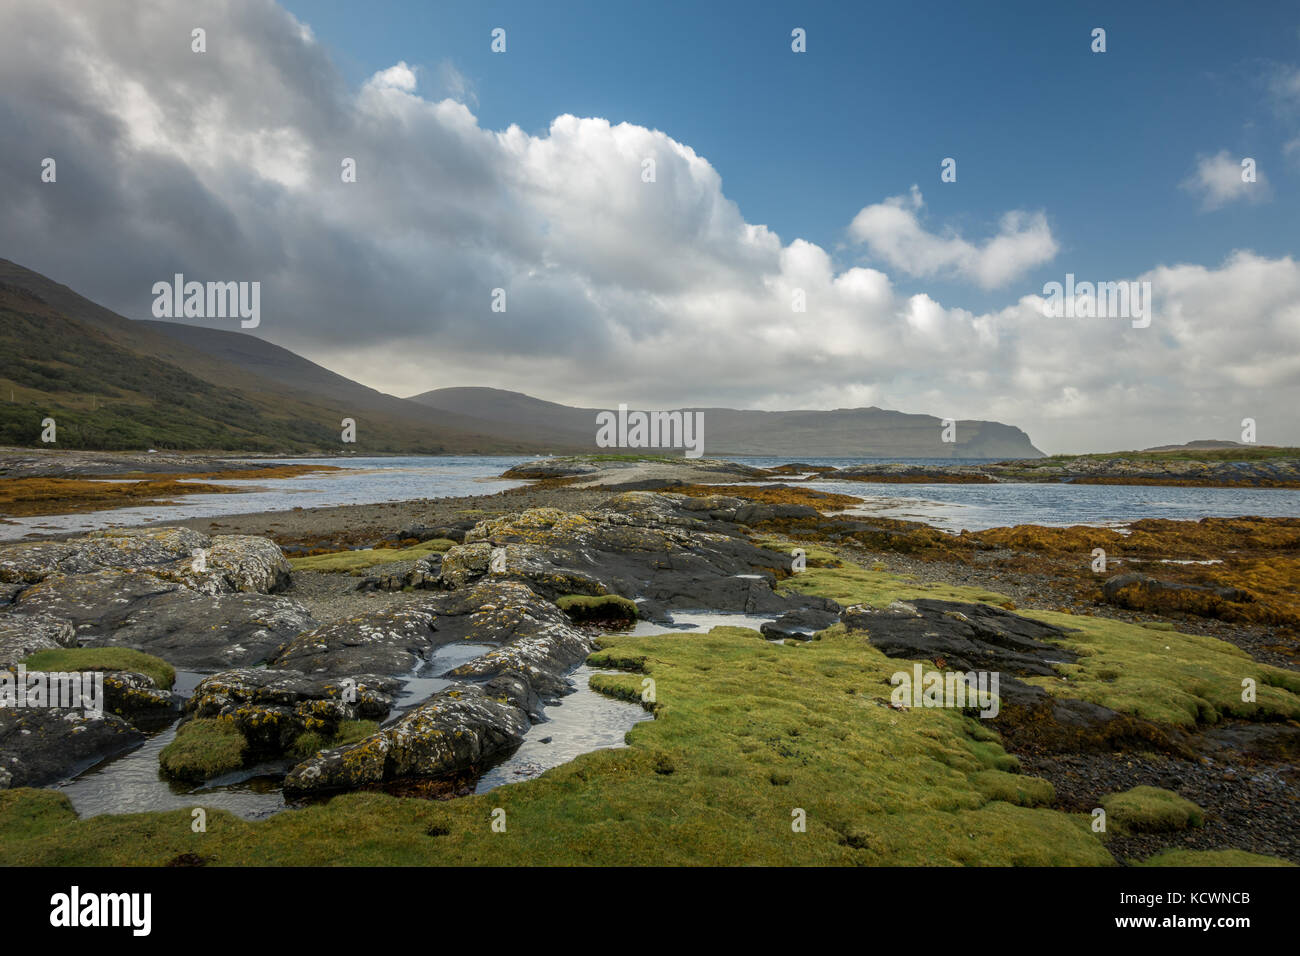 The shores of Loch Na Keal, Isle of Mull, Scotland Stock Photo